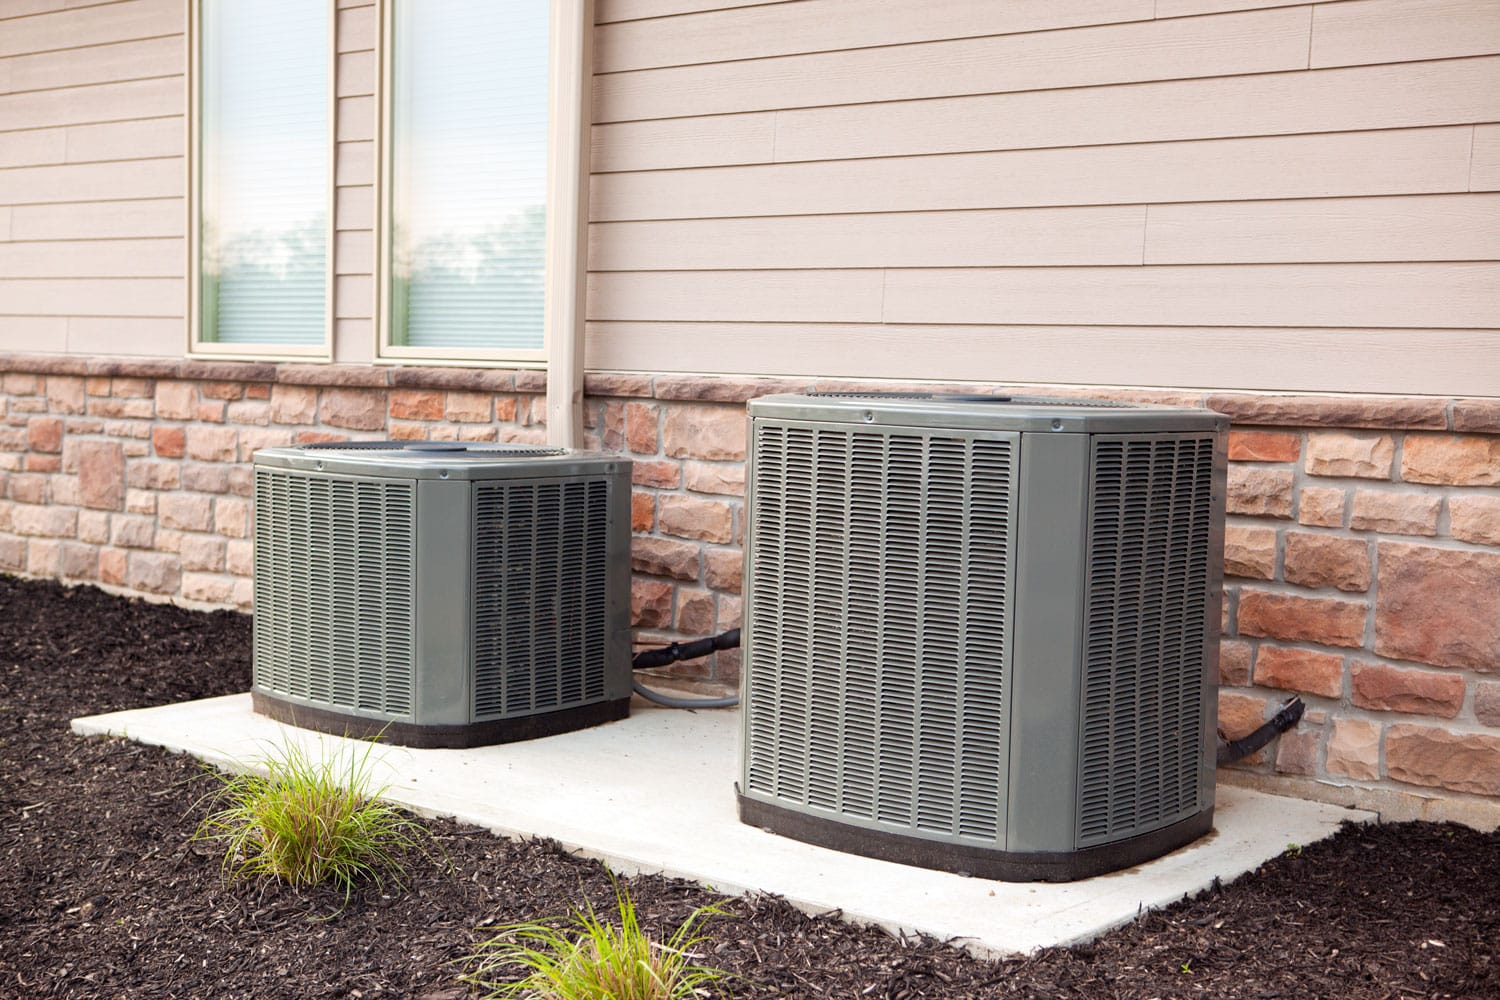 Utilized the landscape around your unit to make it even with the ac unit